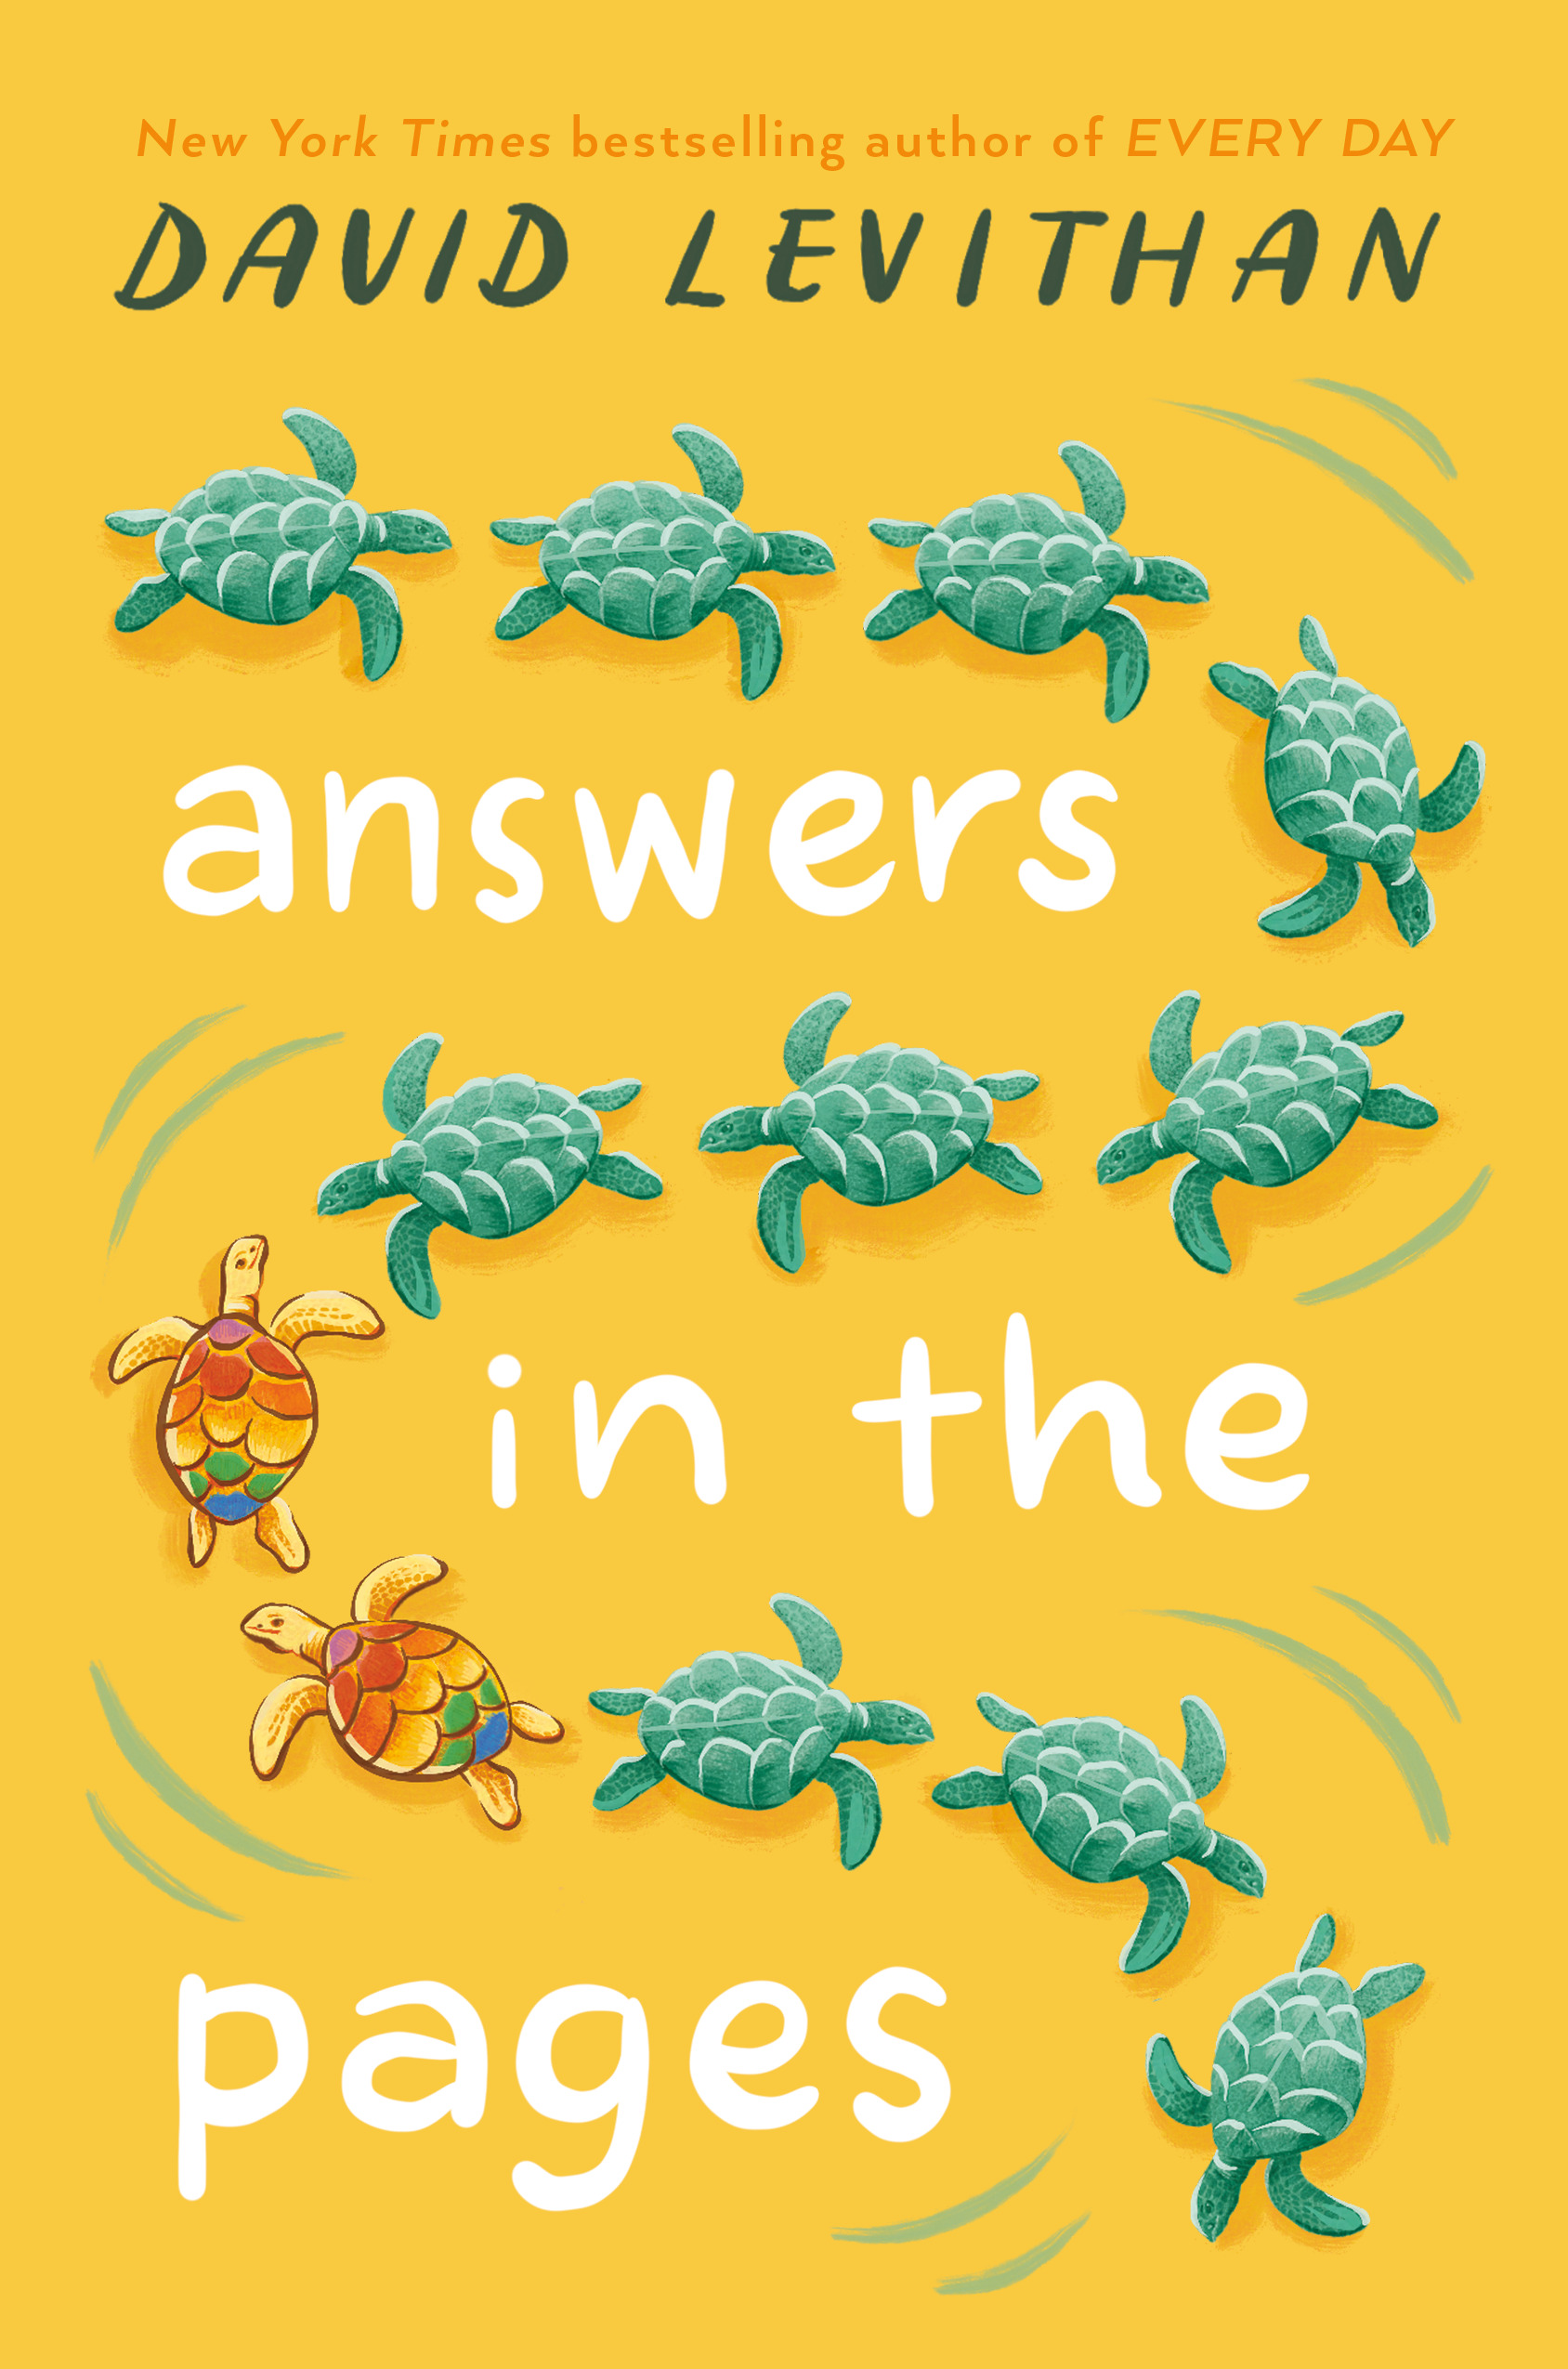 David Levithan's Answers in the Pages book cover